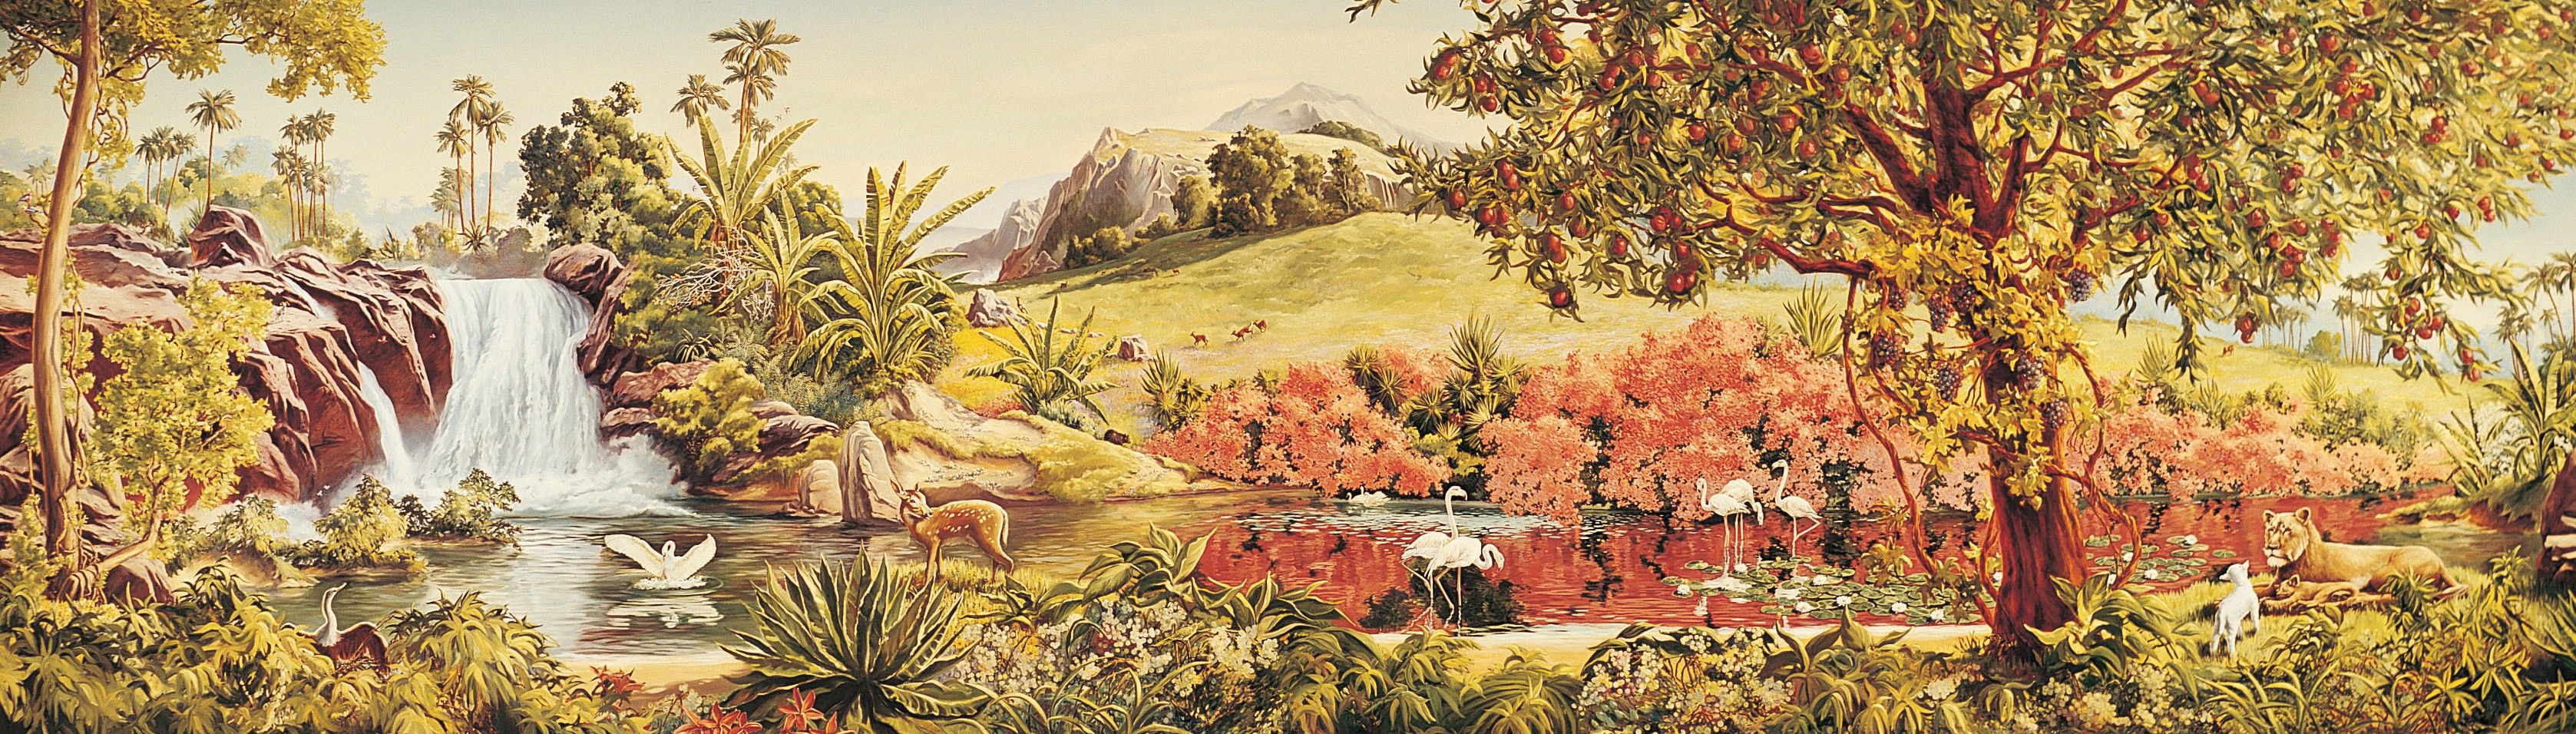 A panoramic painting by Grant Romney Clawson showing the beauty of the Garden of Eden, with a waterfall, large trees, and white birds.